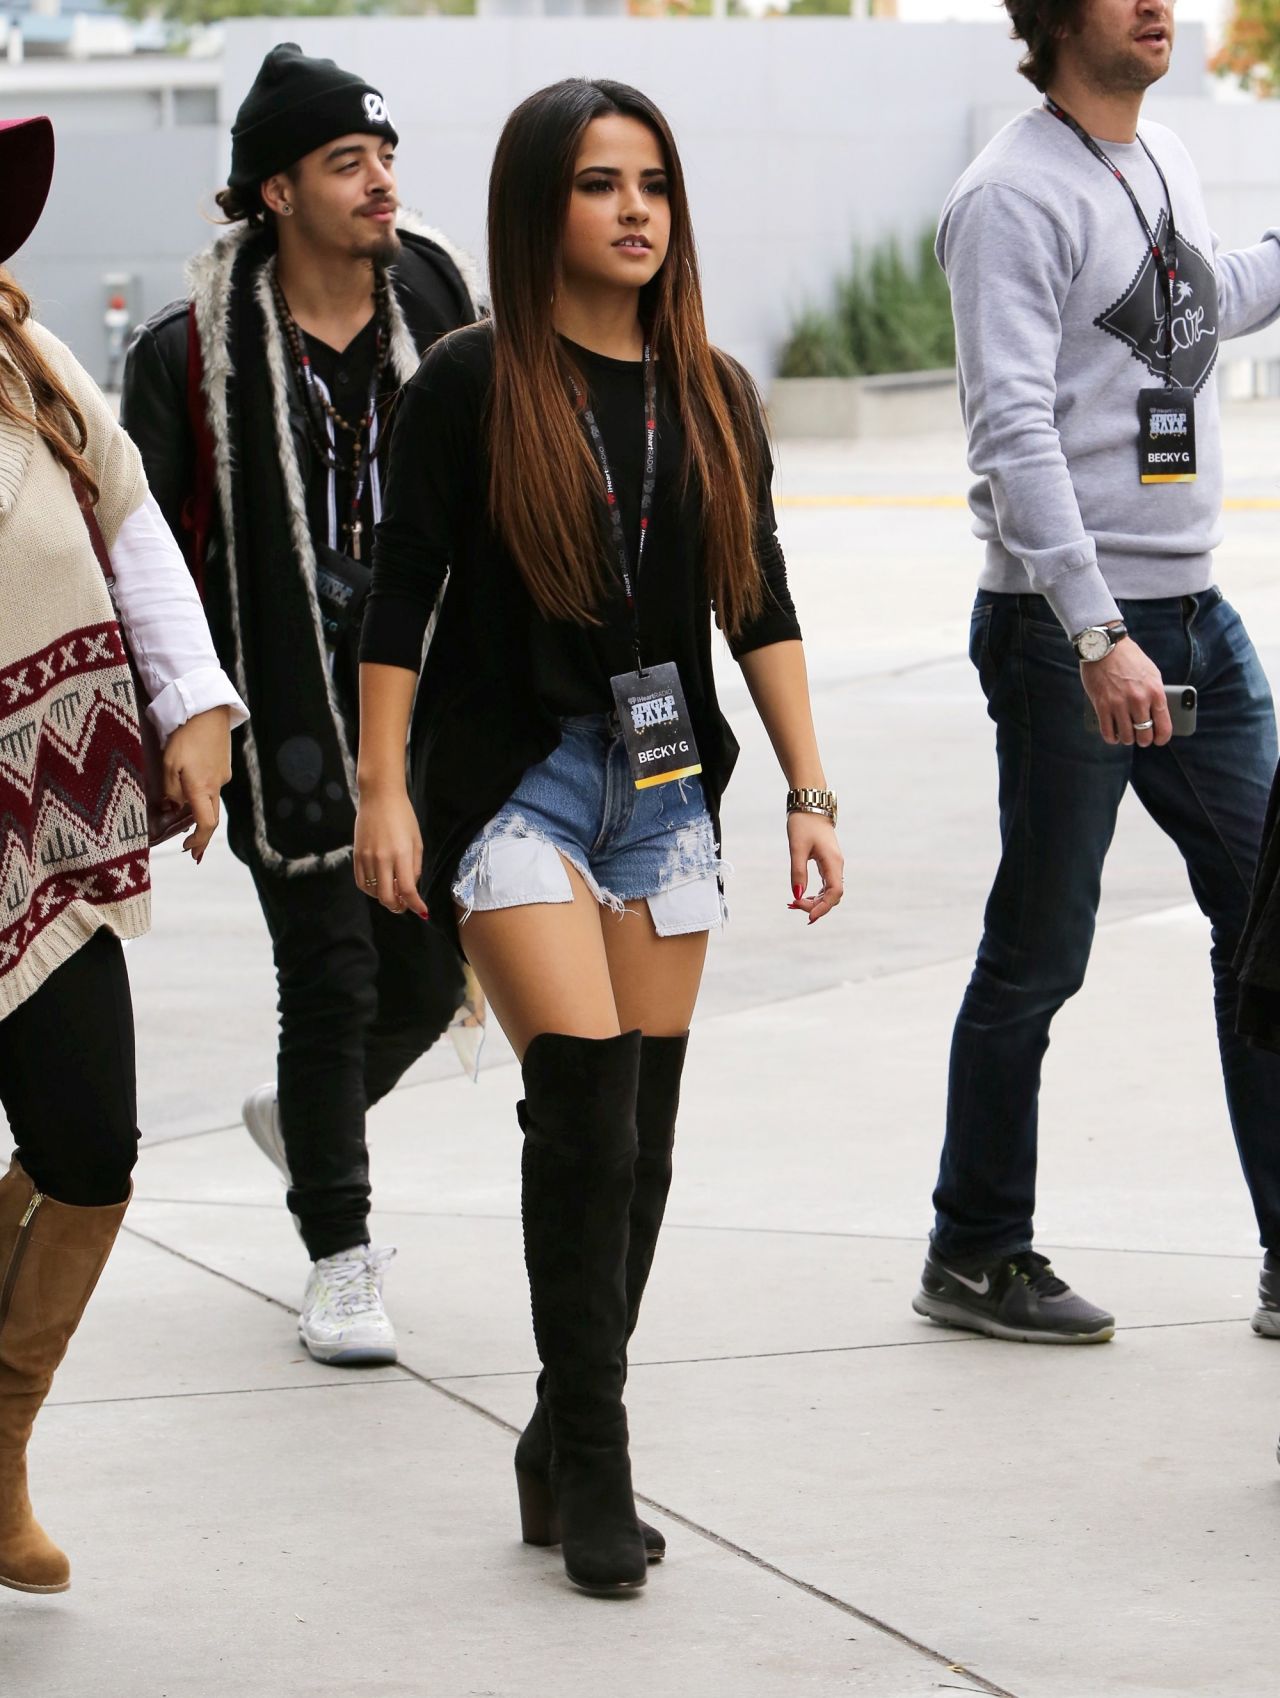 Becky G in Jeans Shorts at the Staples Center in Los Angeles, Dec. 